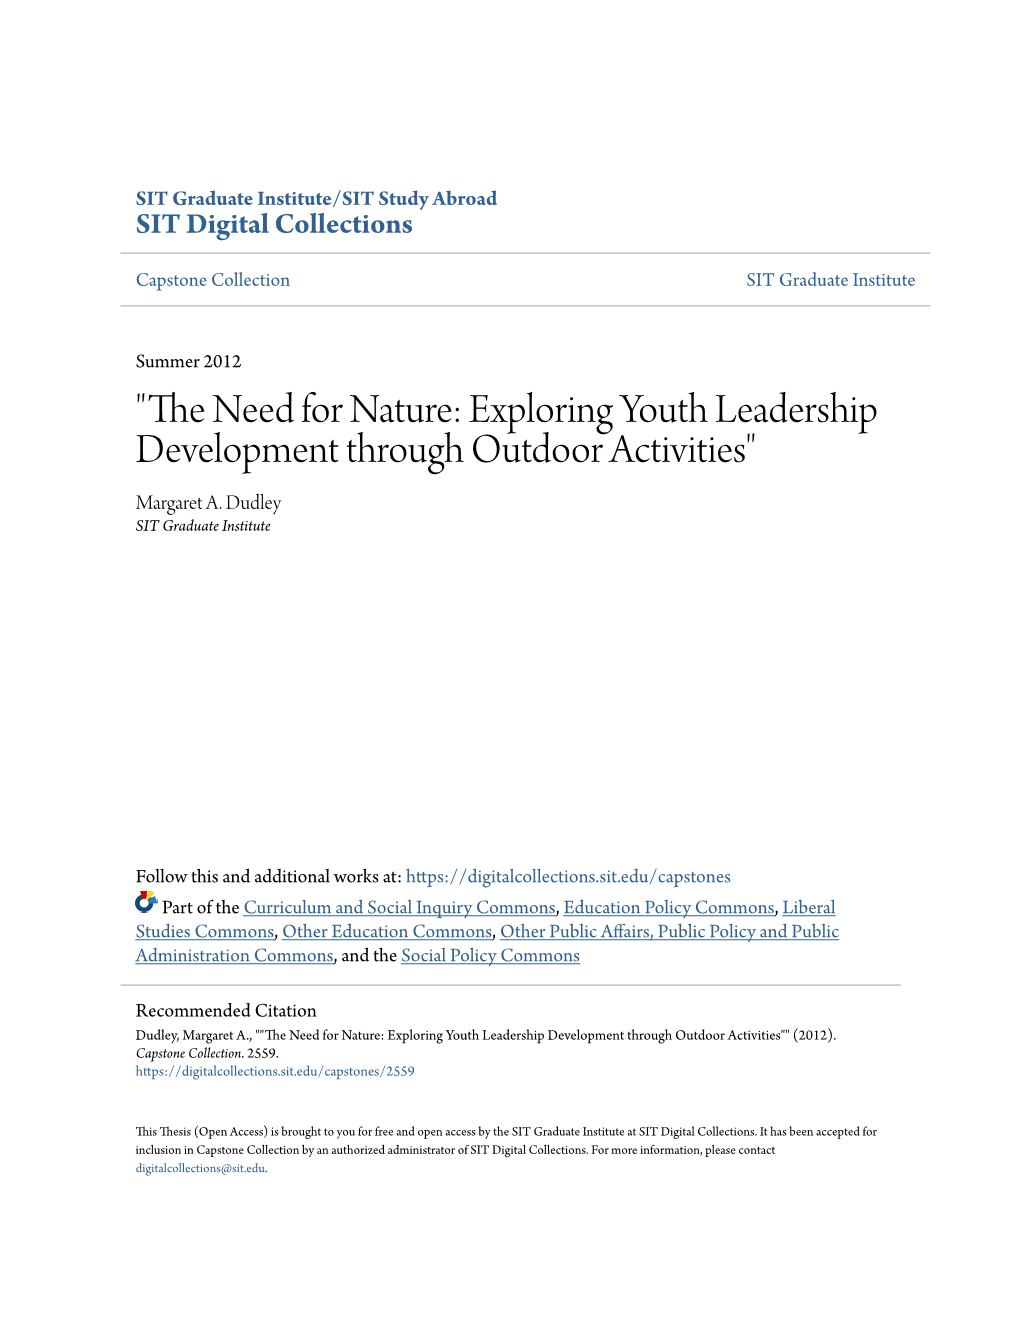 "The Need for Nature: Exploring Youth Leadership Development Through